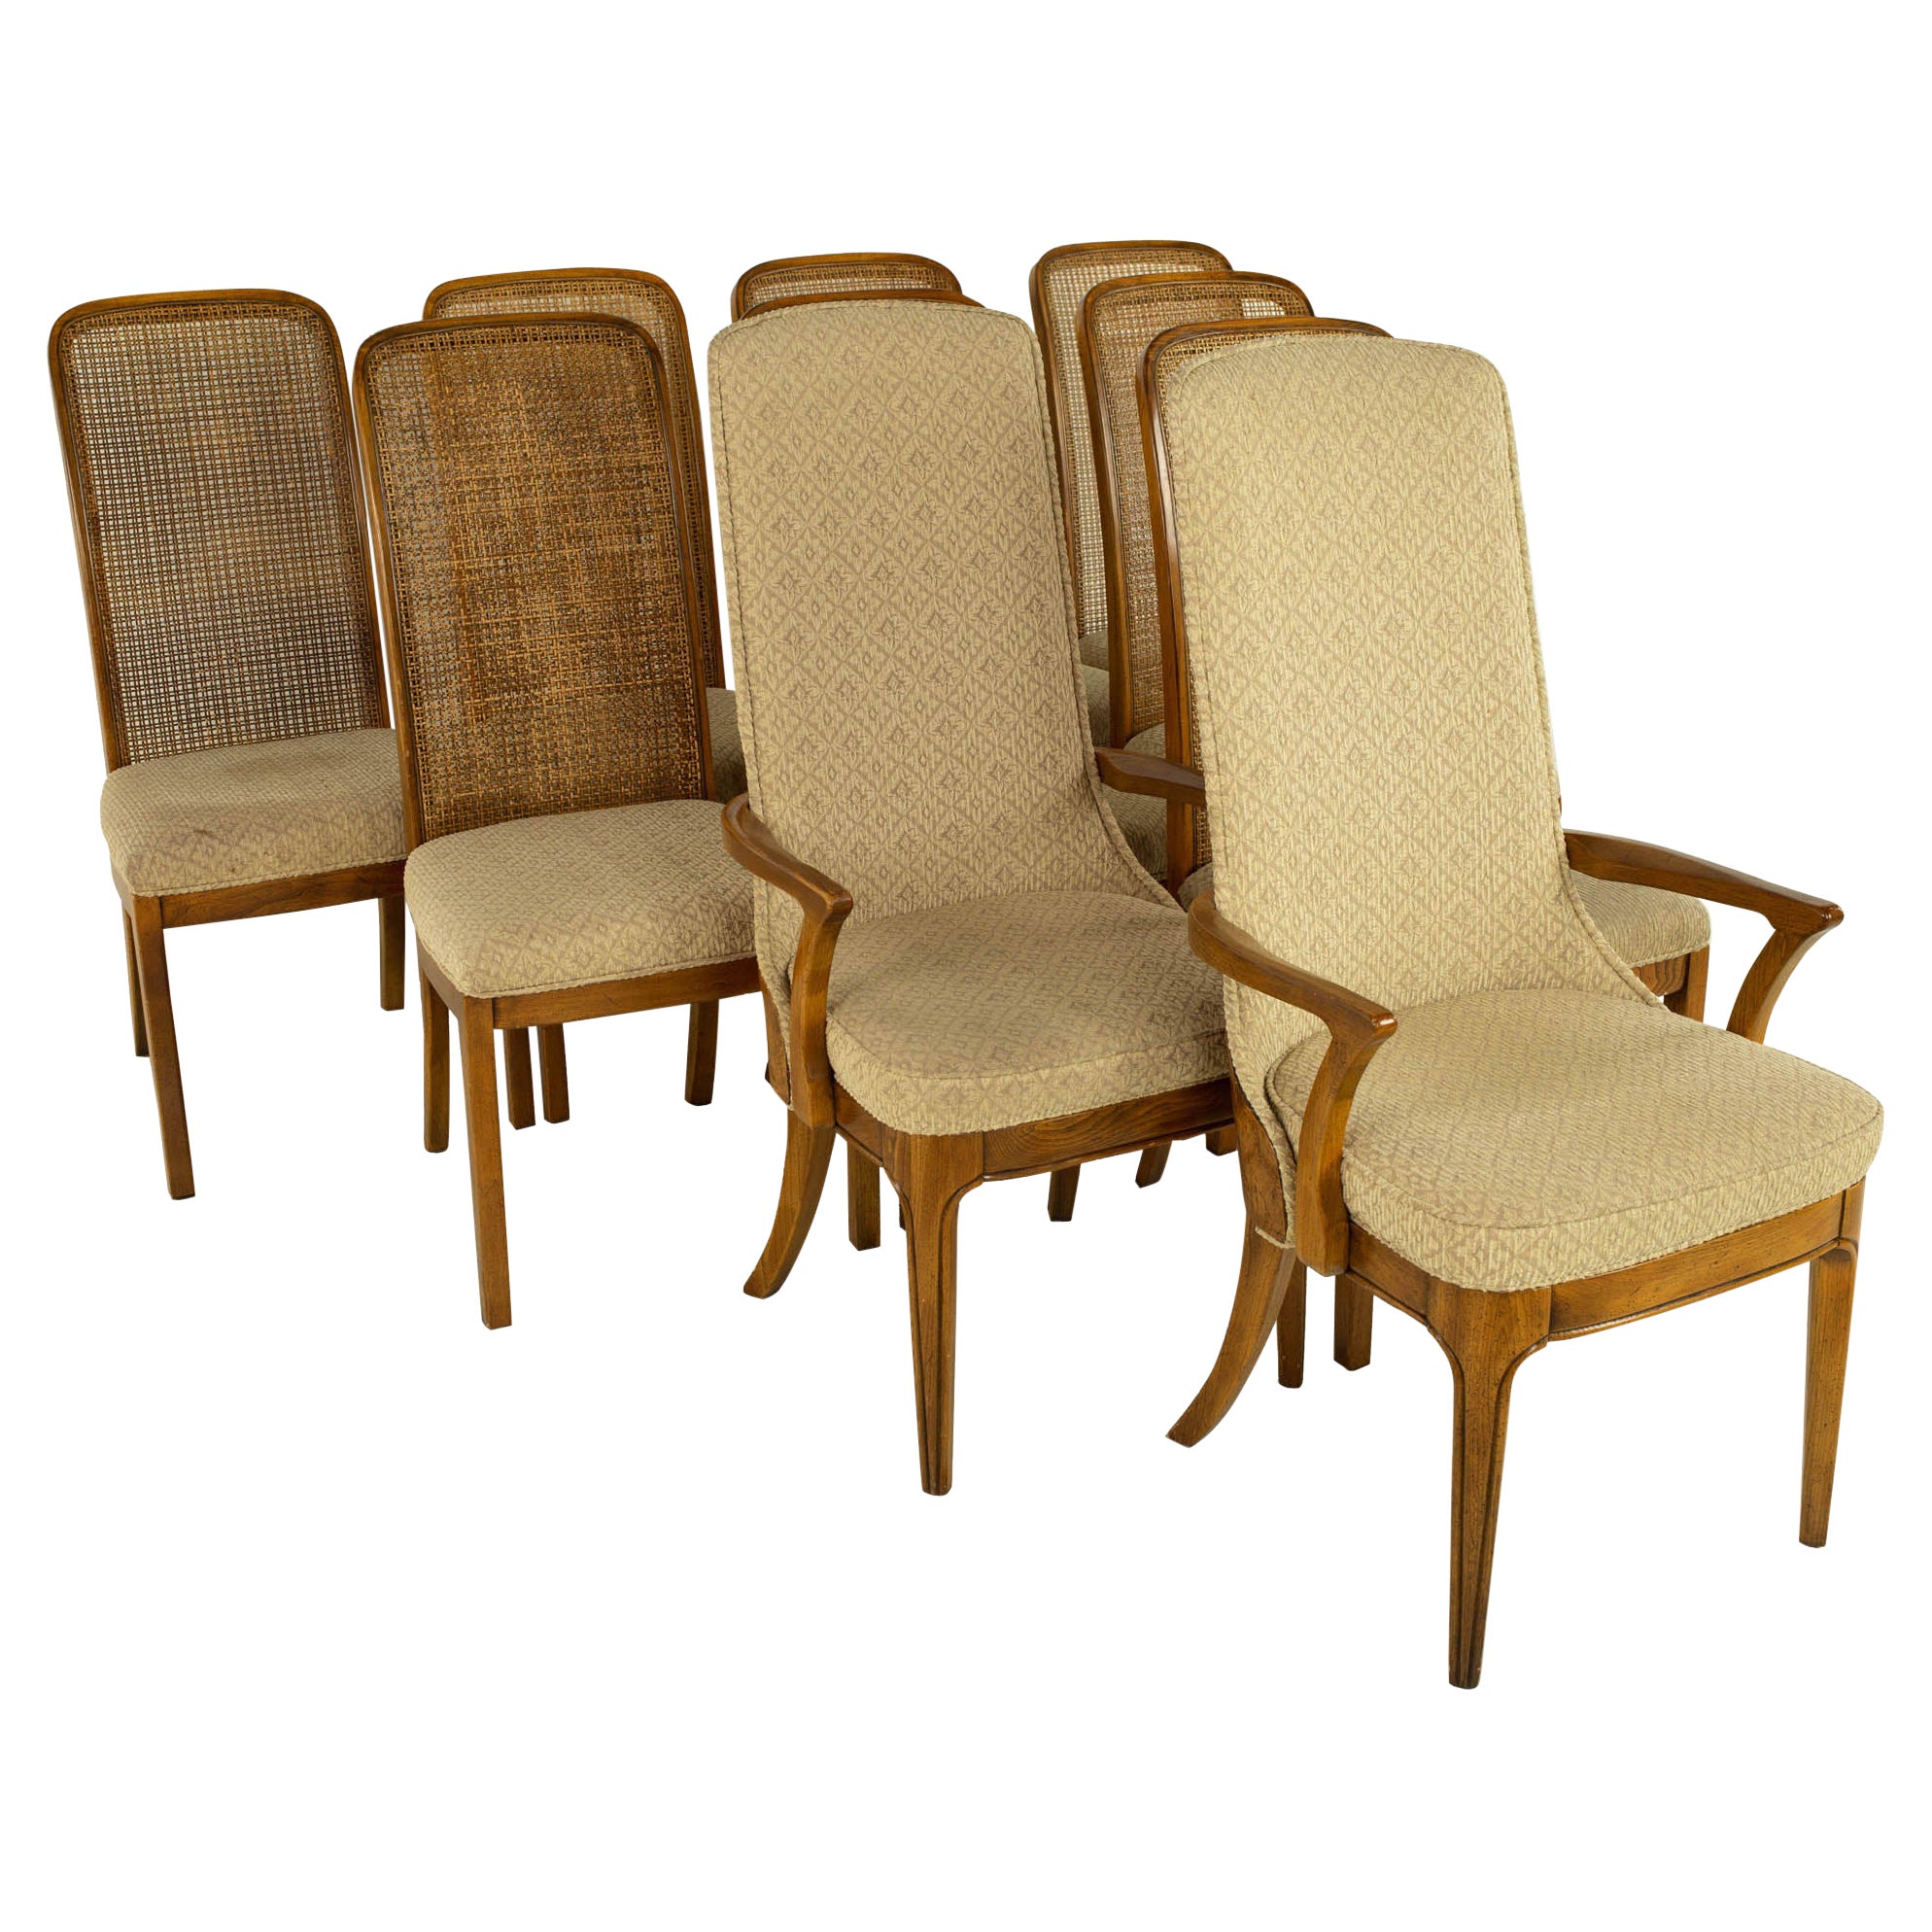 Hickory Manufacturing Company Mid Century Burlwood Cane Dining Chairs, Set 10